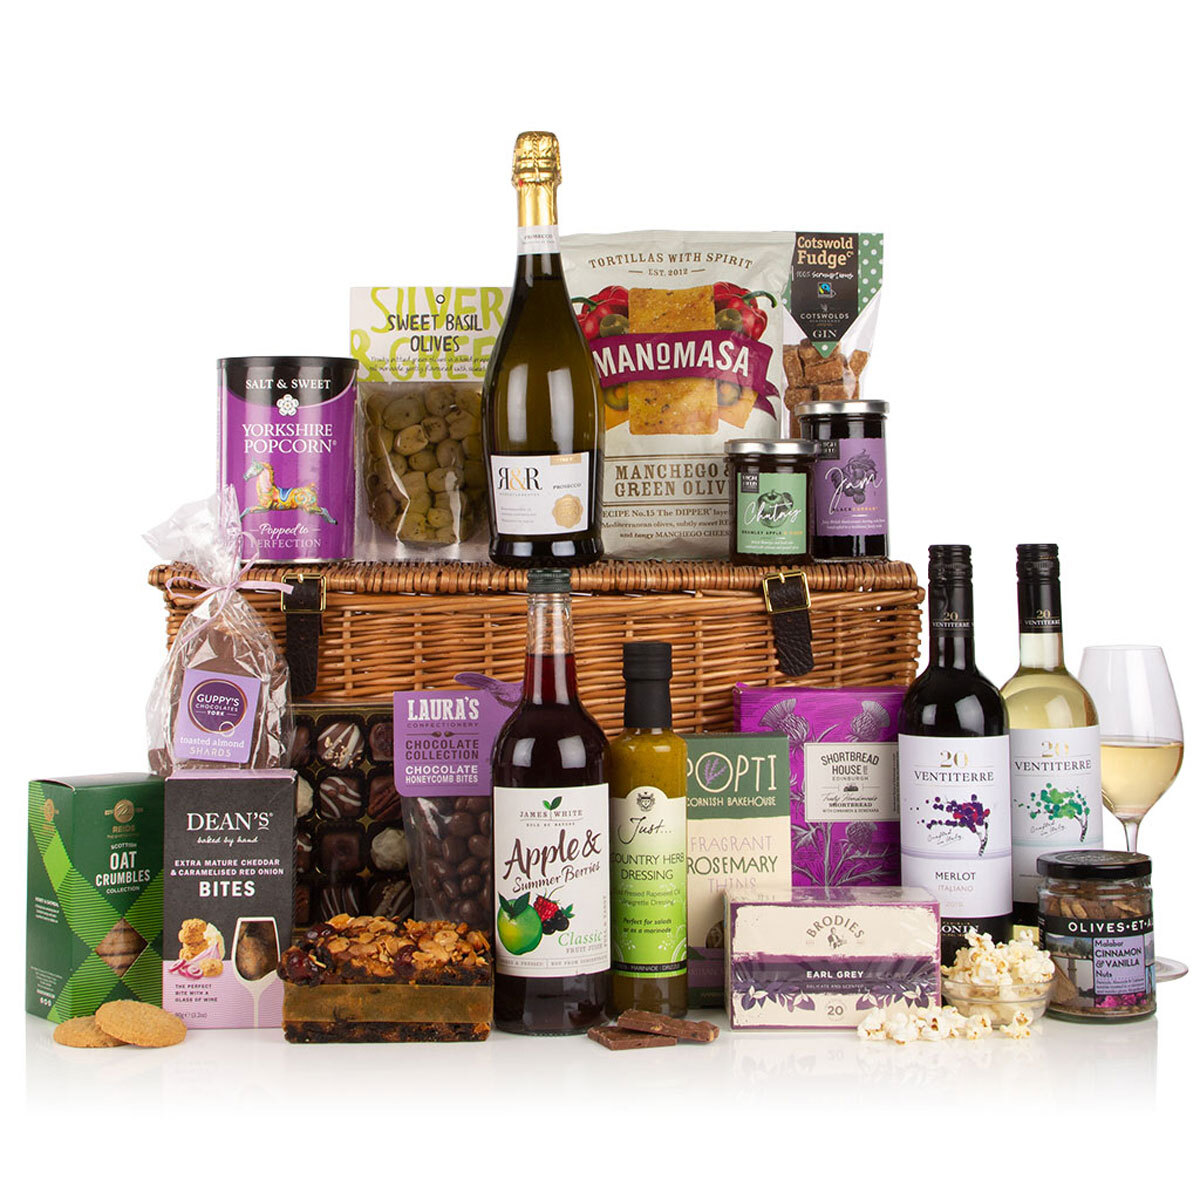 Hamper with contents above and around the basket